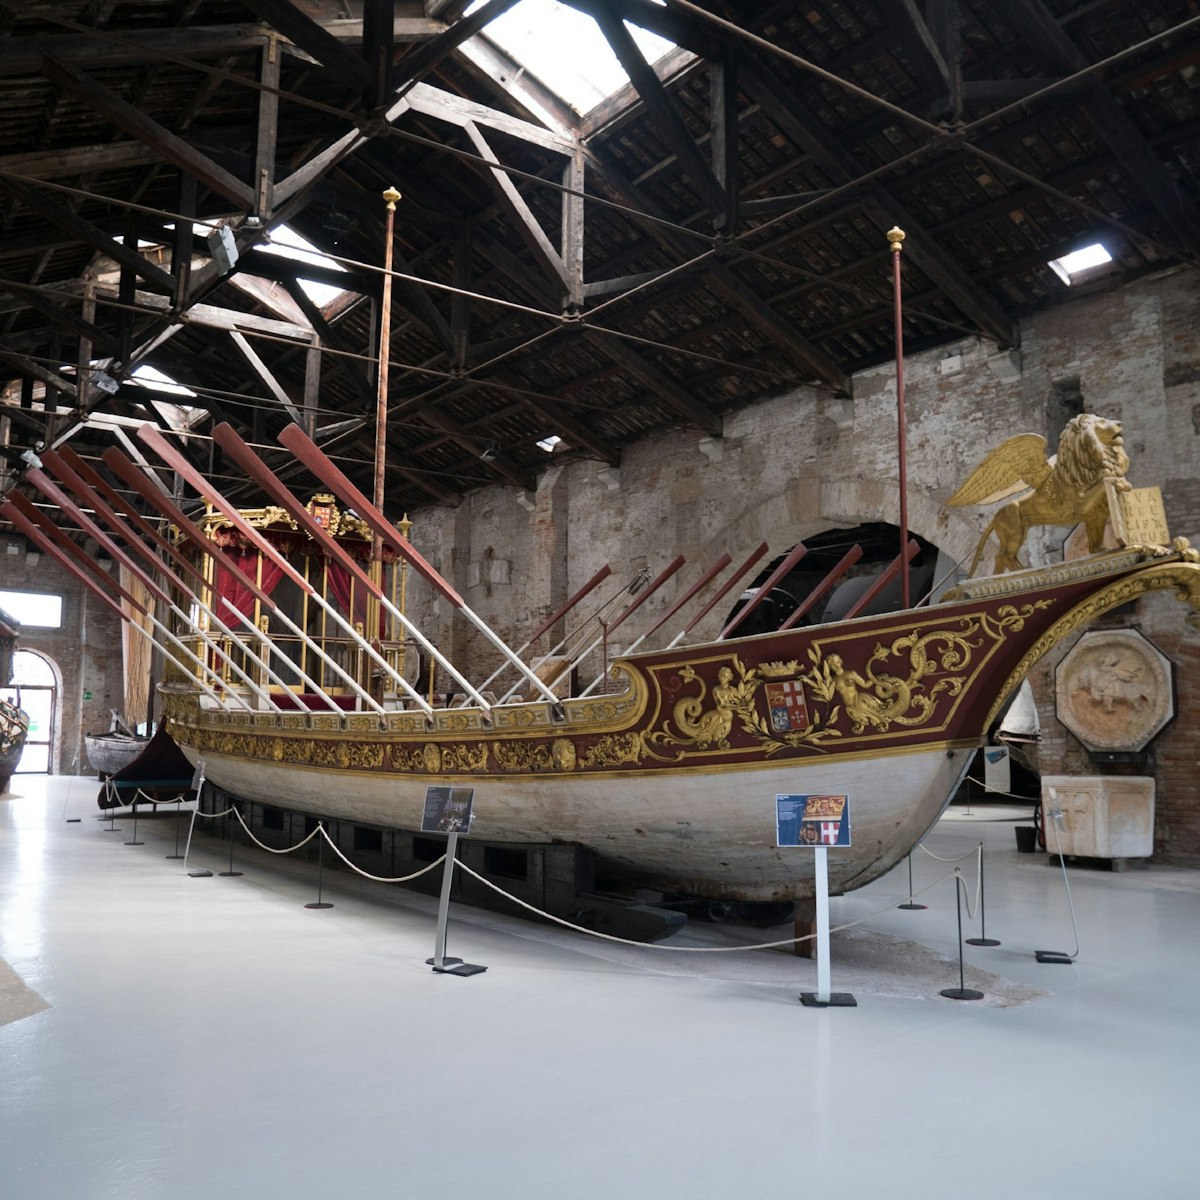 The Scalé Reale is the most impressive craft on display